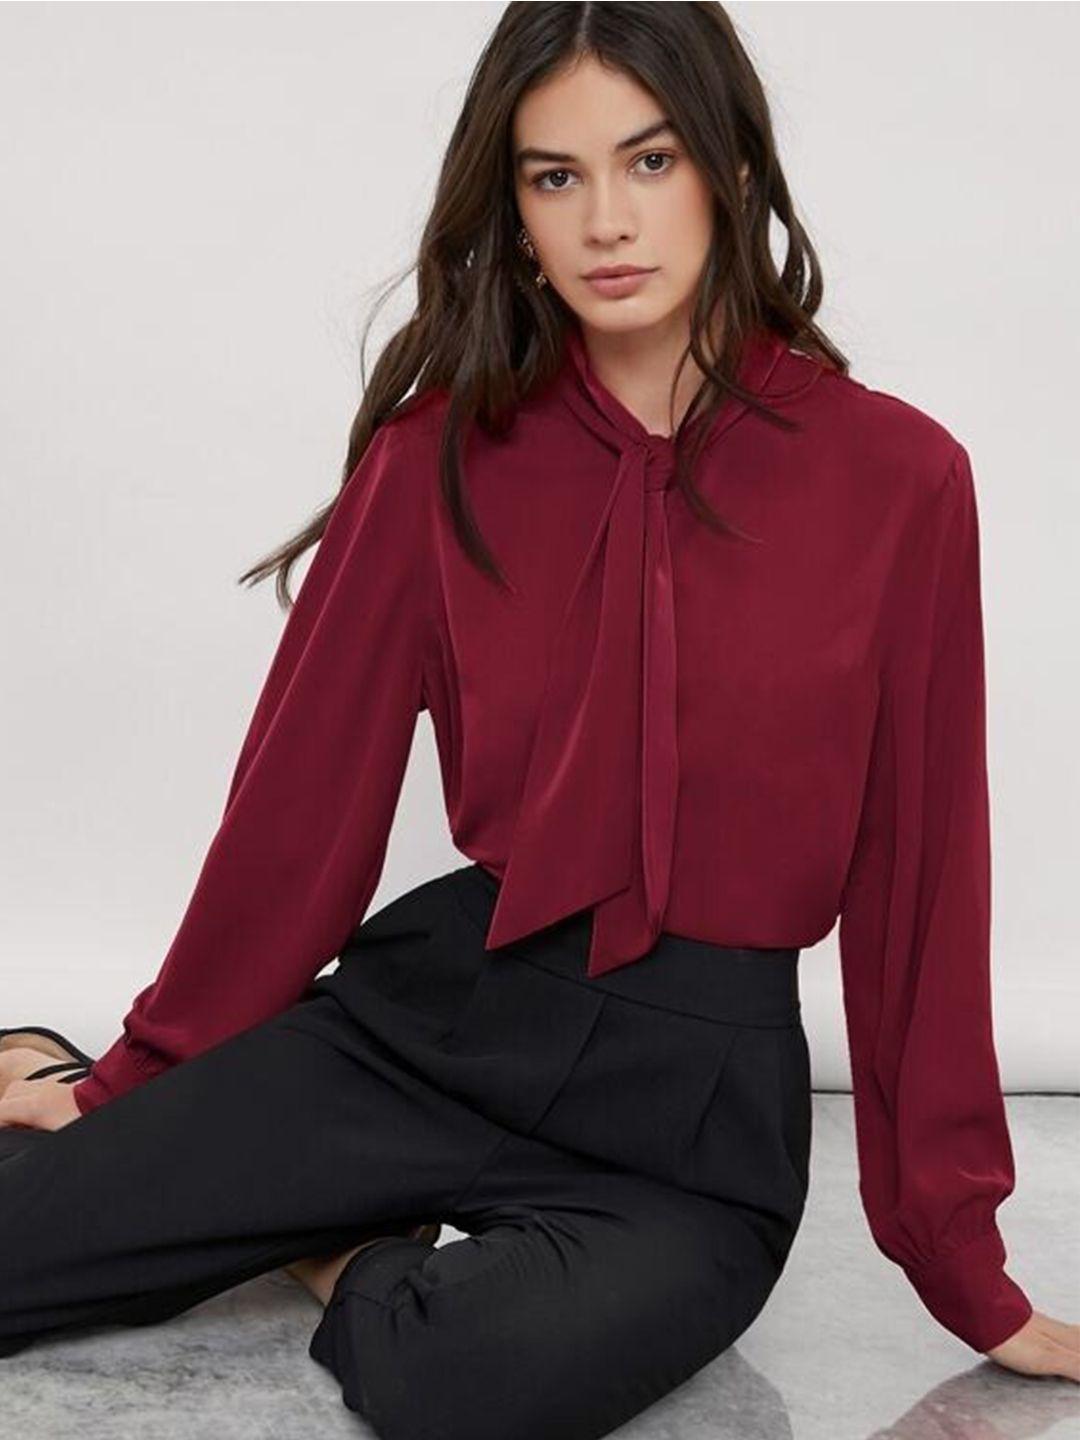 fnocks tie-up neck cuffed sleeve shirt style top